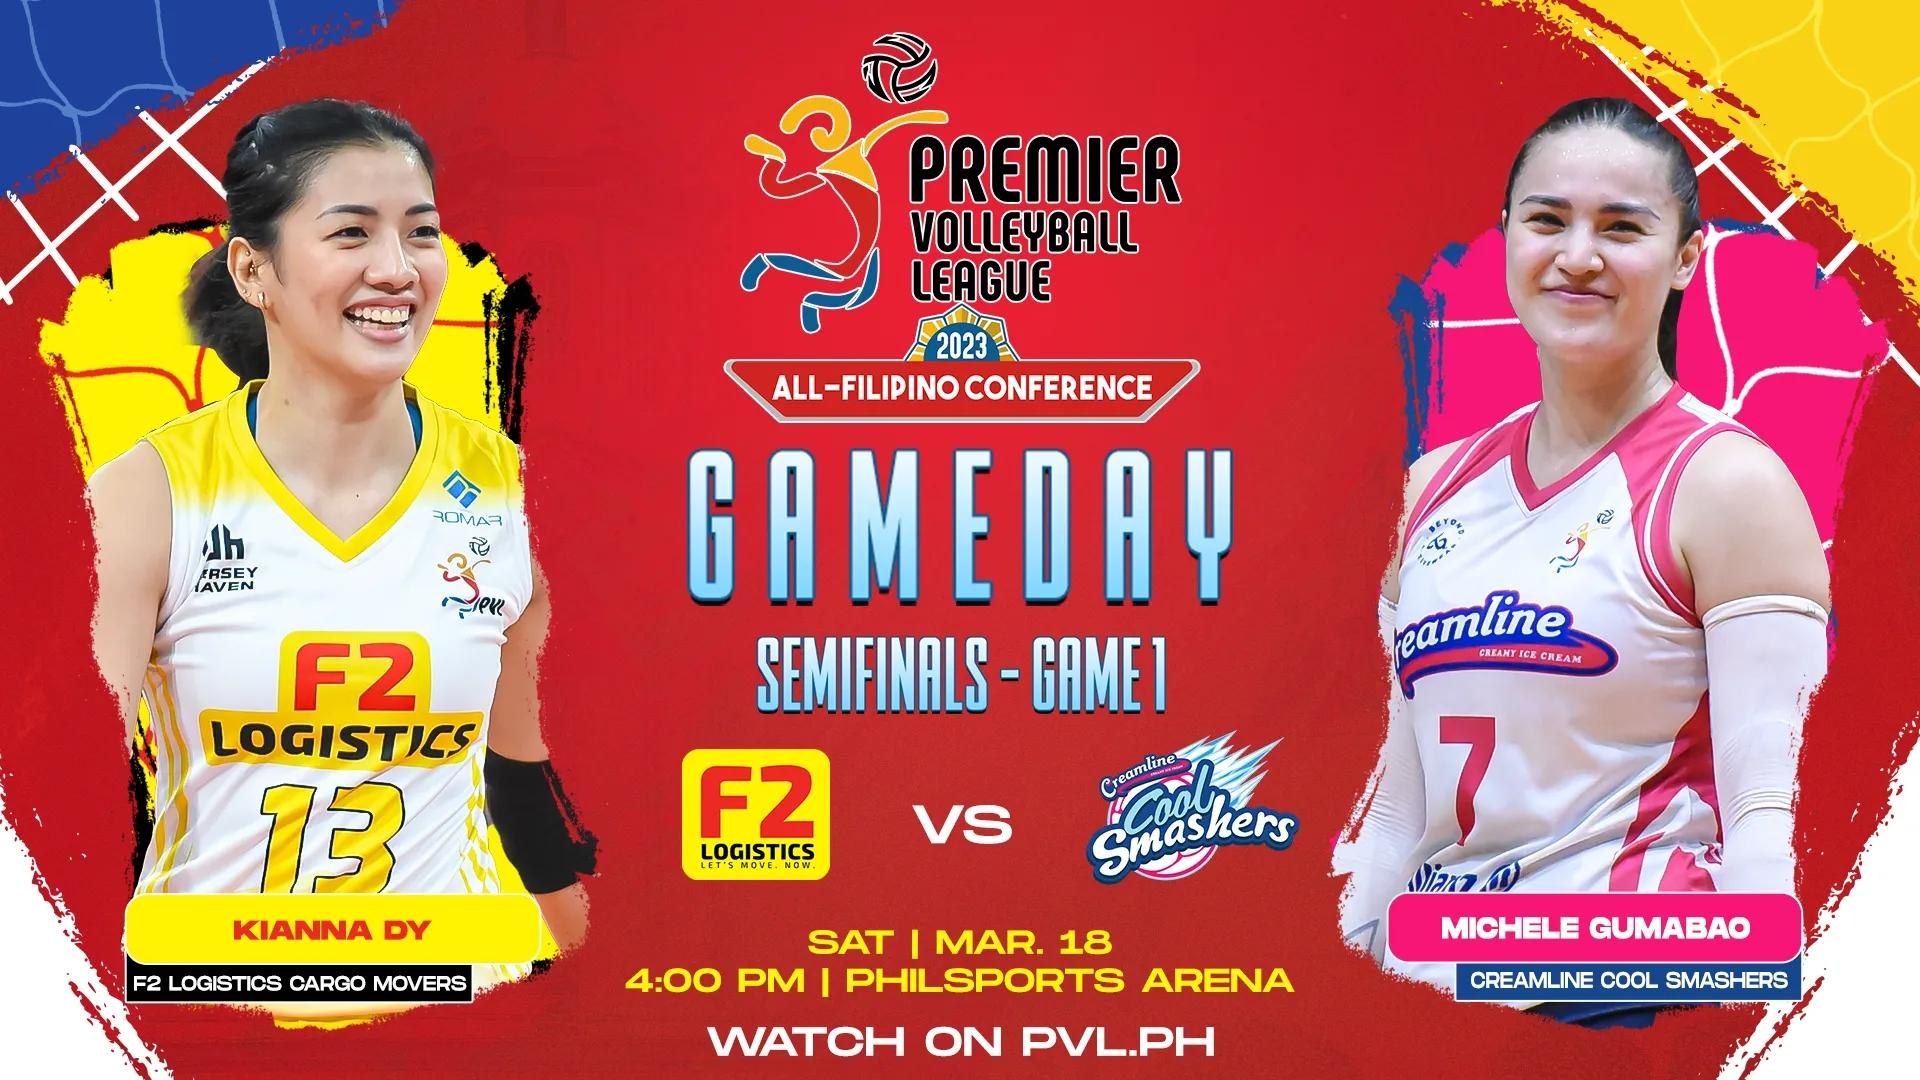 GAME 1 MARCH 18, 2023 F2 LOGISTICS CARGO MOVERS vs CREAMLINE COOL SMASHERS ALL-FILIPINO CONFERENCE